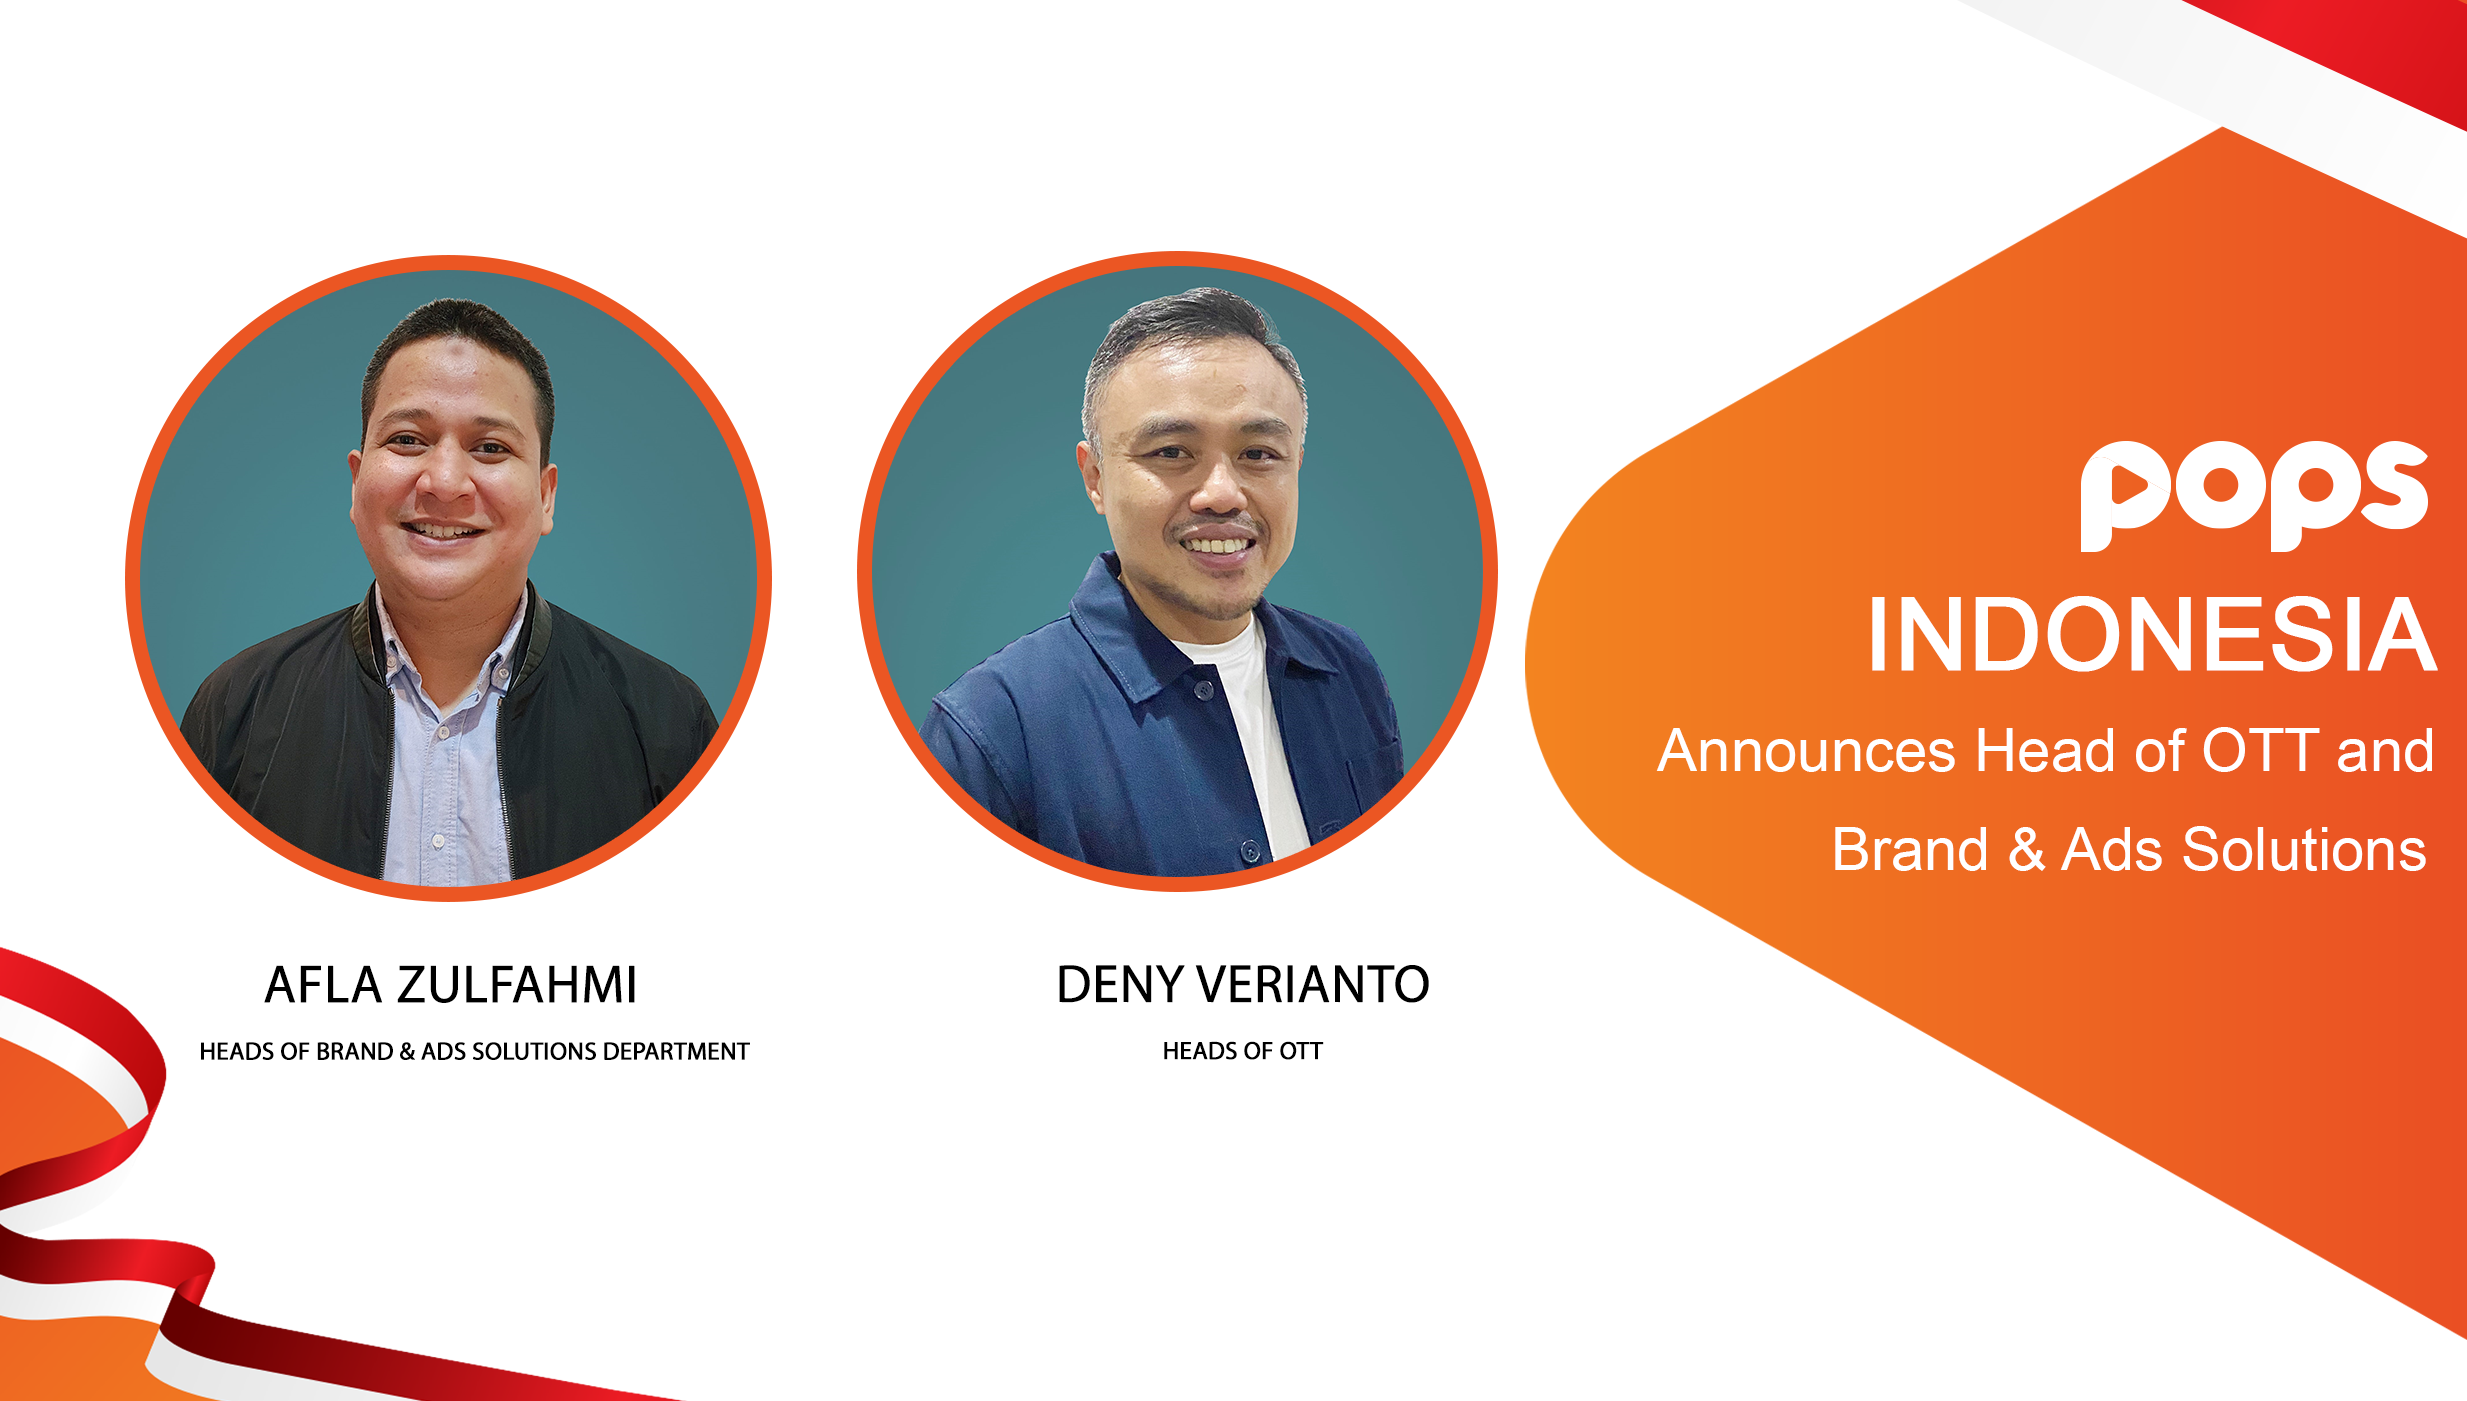 Deny Verianto & Afla Zulfahmi Join POPS Indonesia As Heads of OTT and Brands & Ads Solutions Departments